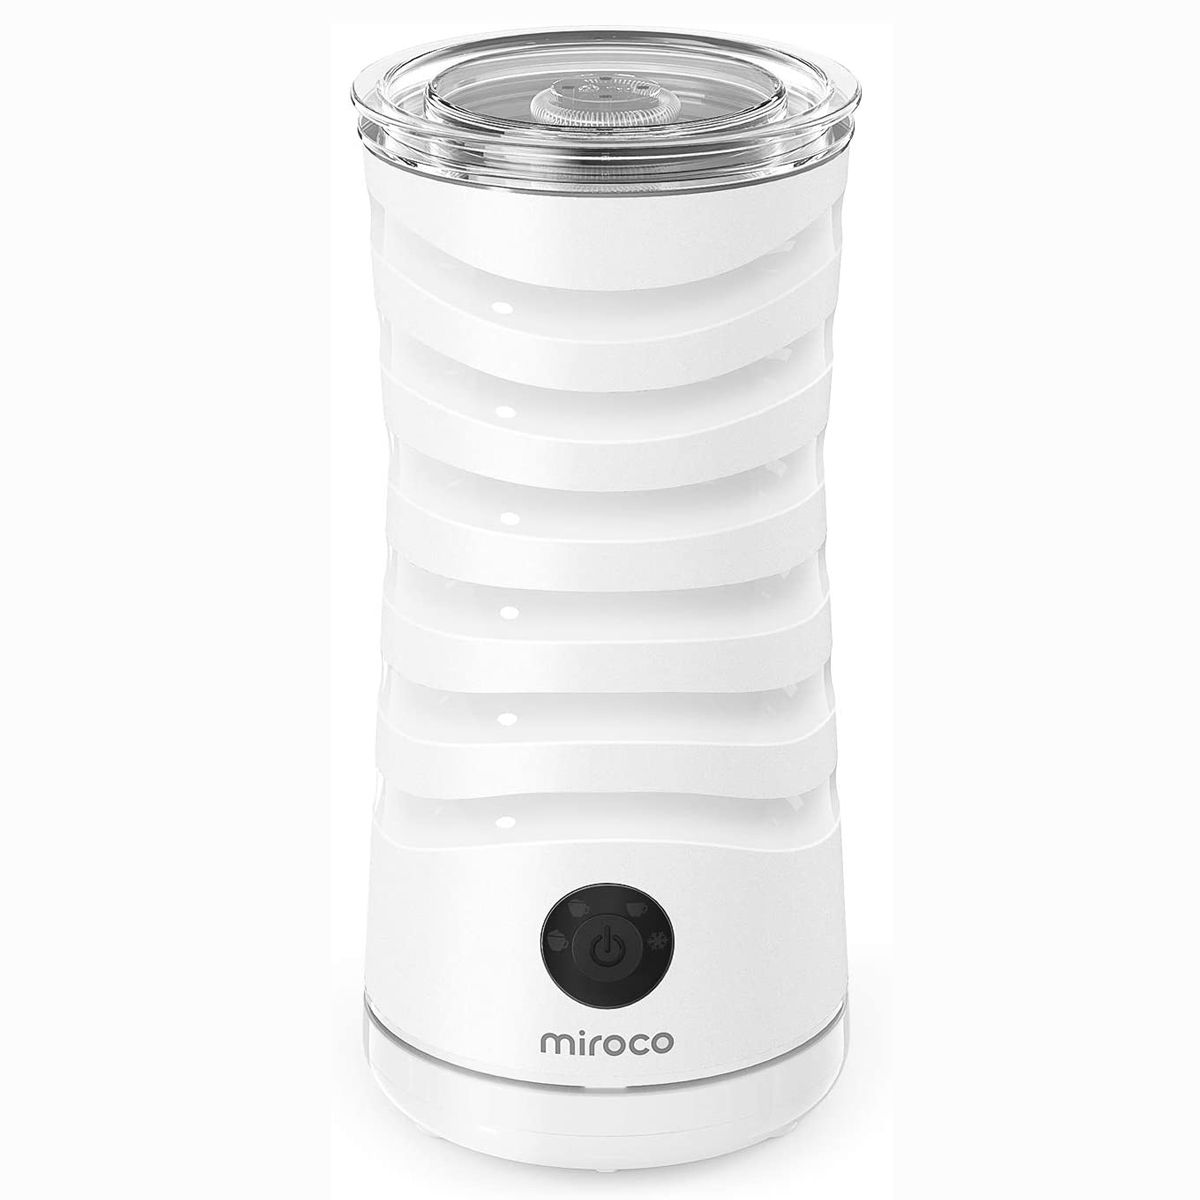 miroco milk frother